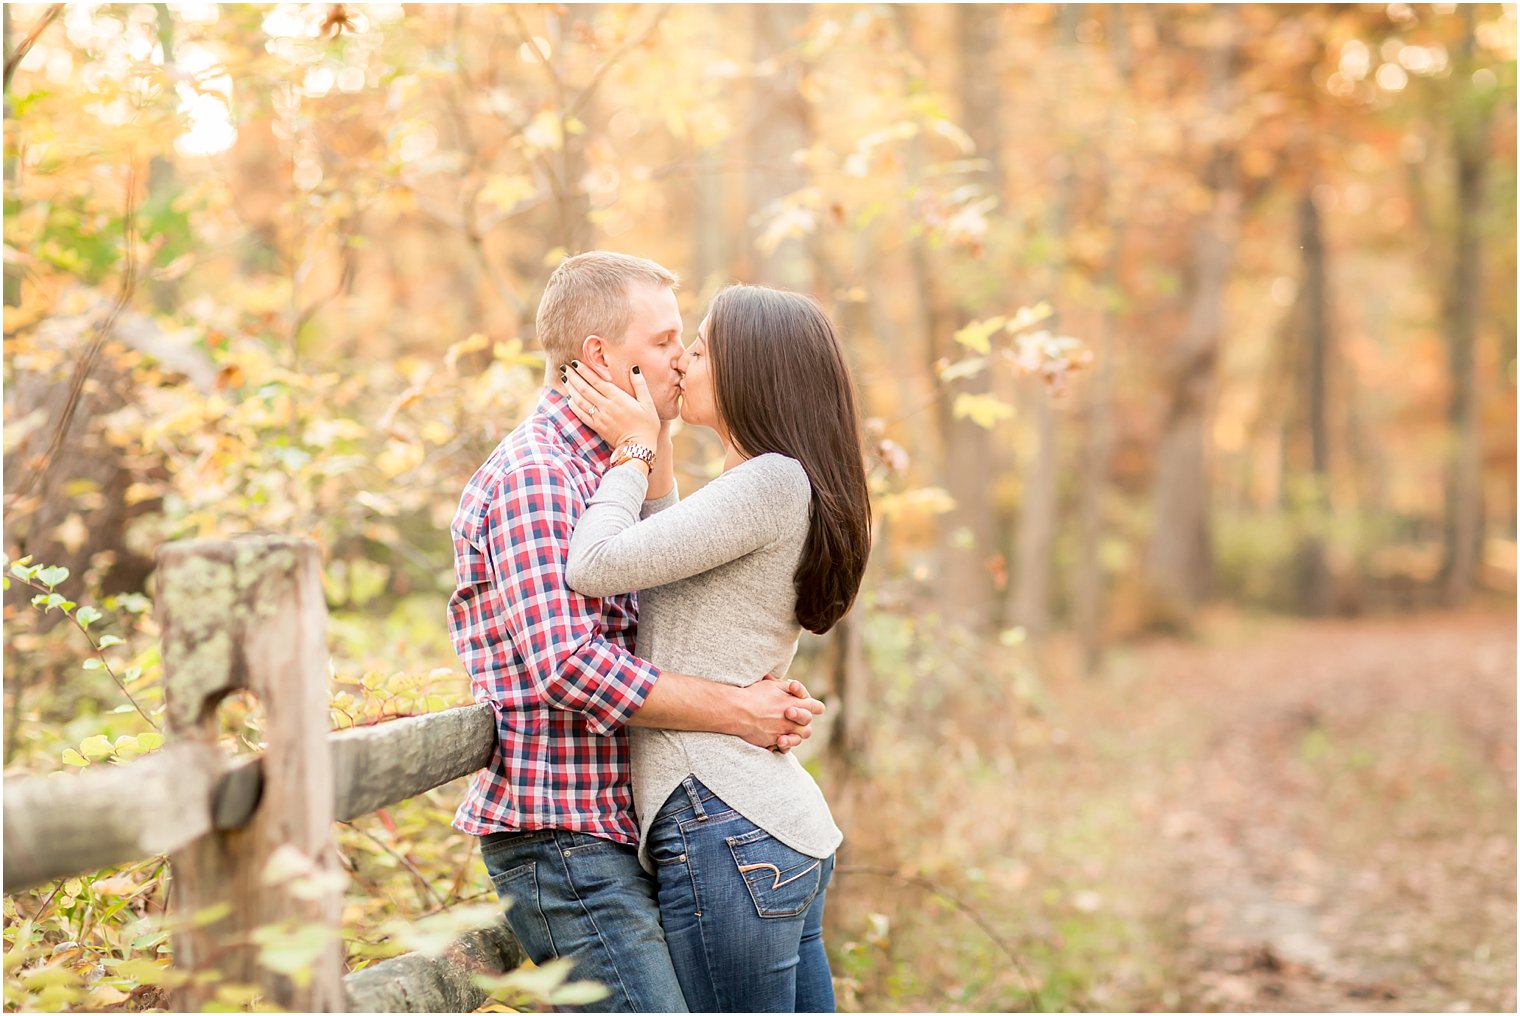 Park engagement photos in the fall